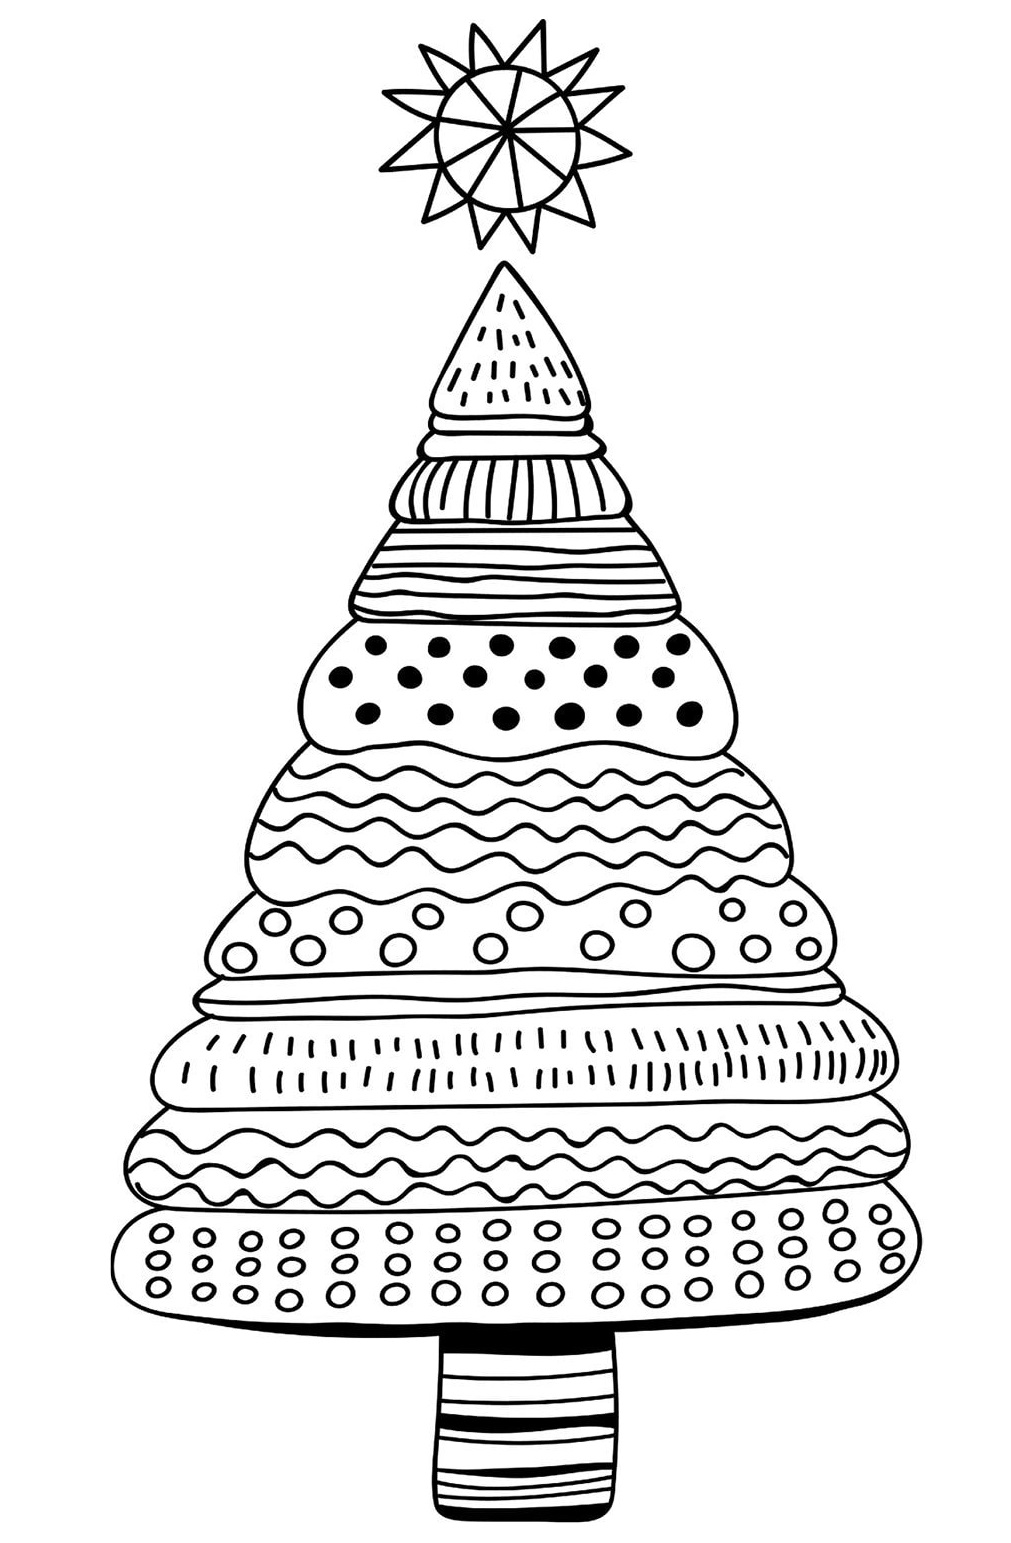 Simple Pretty Patterns On A Christmas Tree Coloring Page